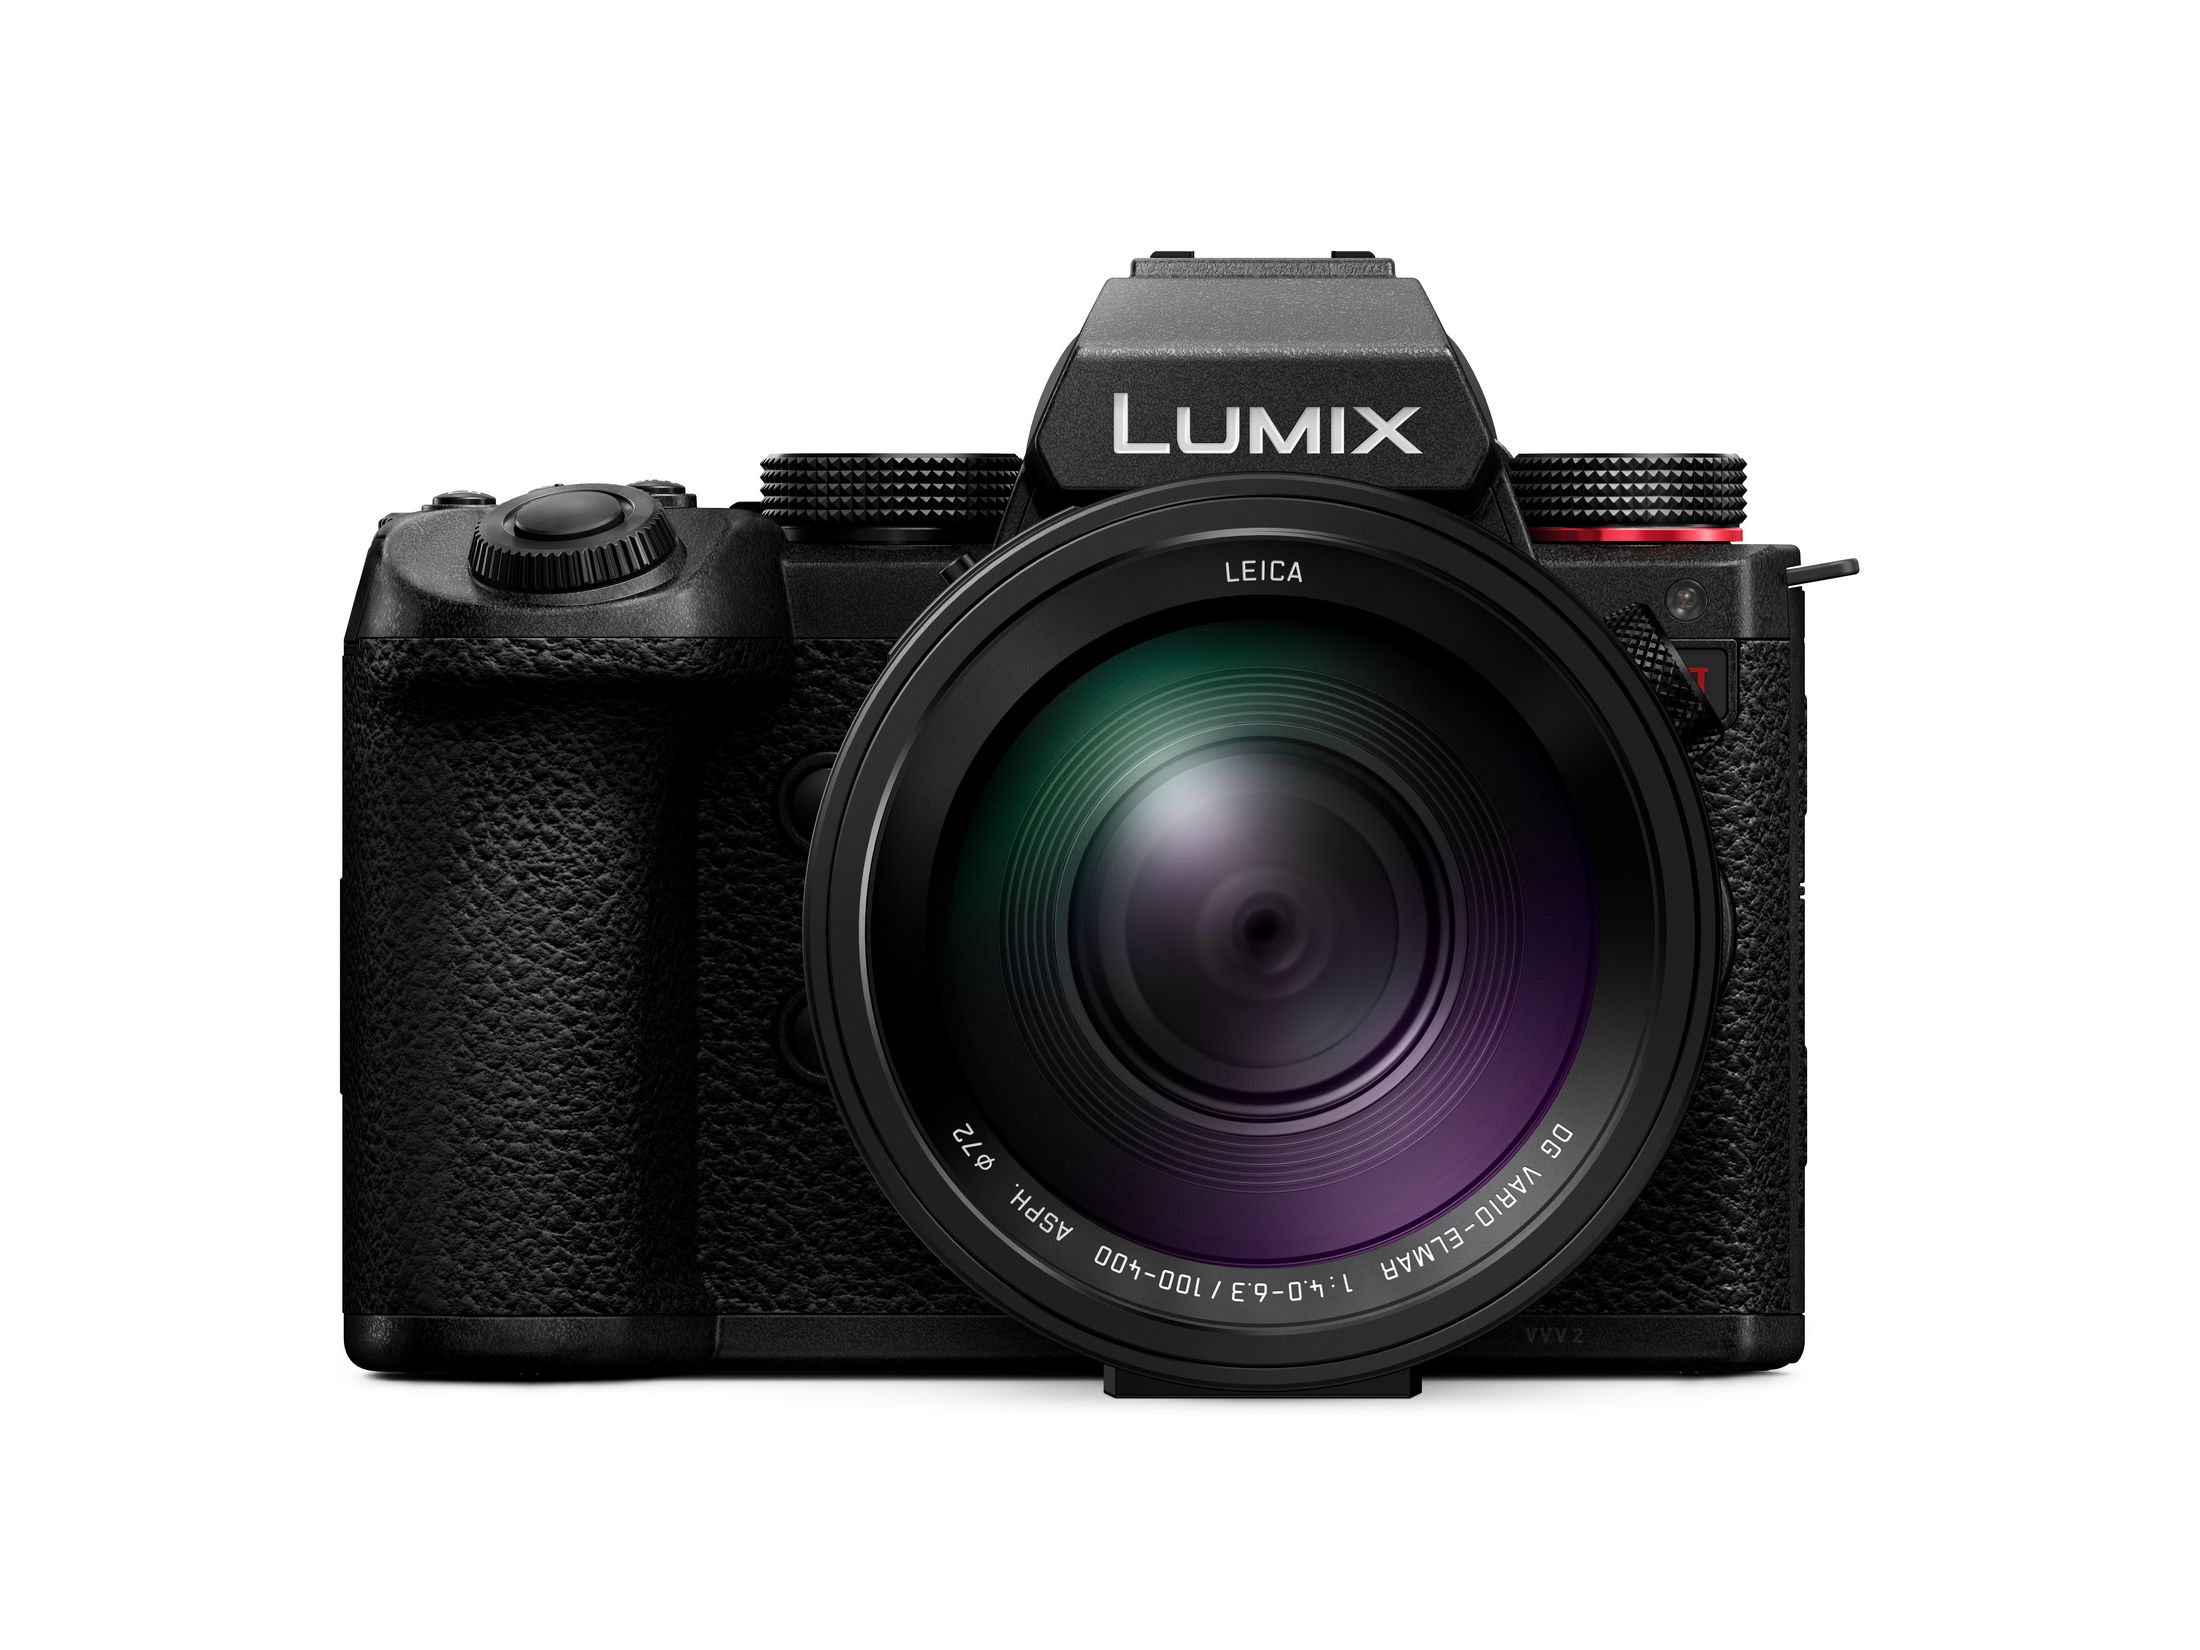 Panasonic's Lumix G9 II is its first Micro Four Thirds camera with hybrid autofocus